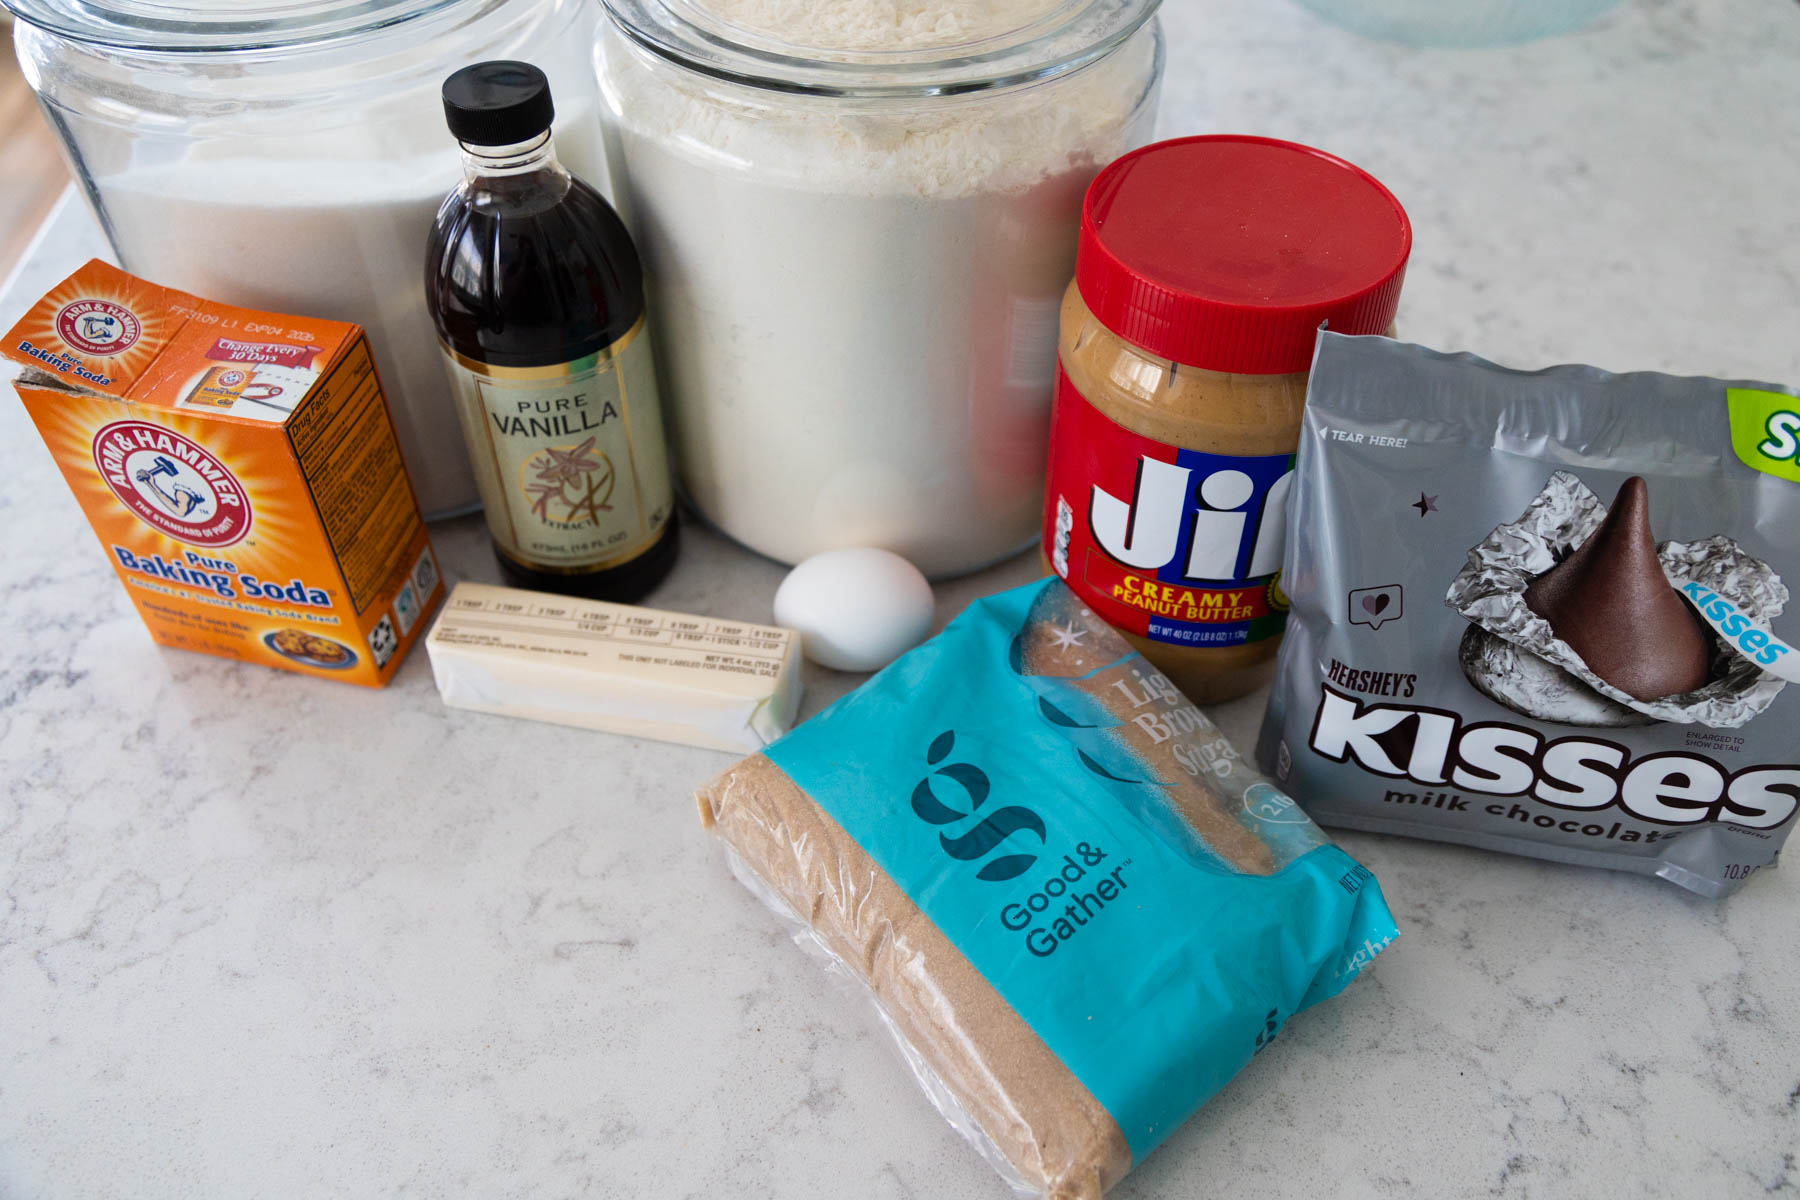 The ingredients to make peanut butter blossom cookies are on the counter.